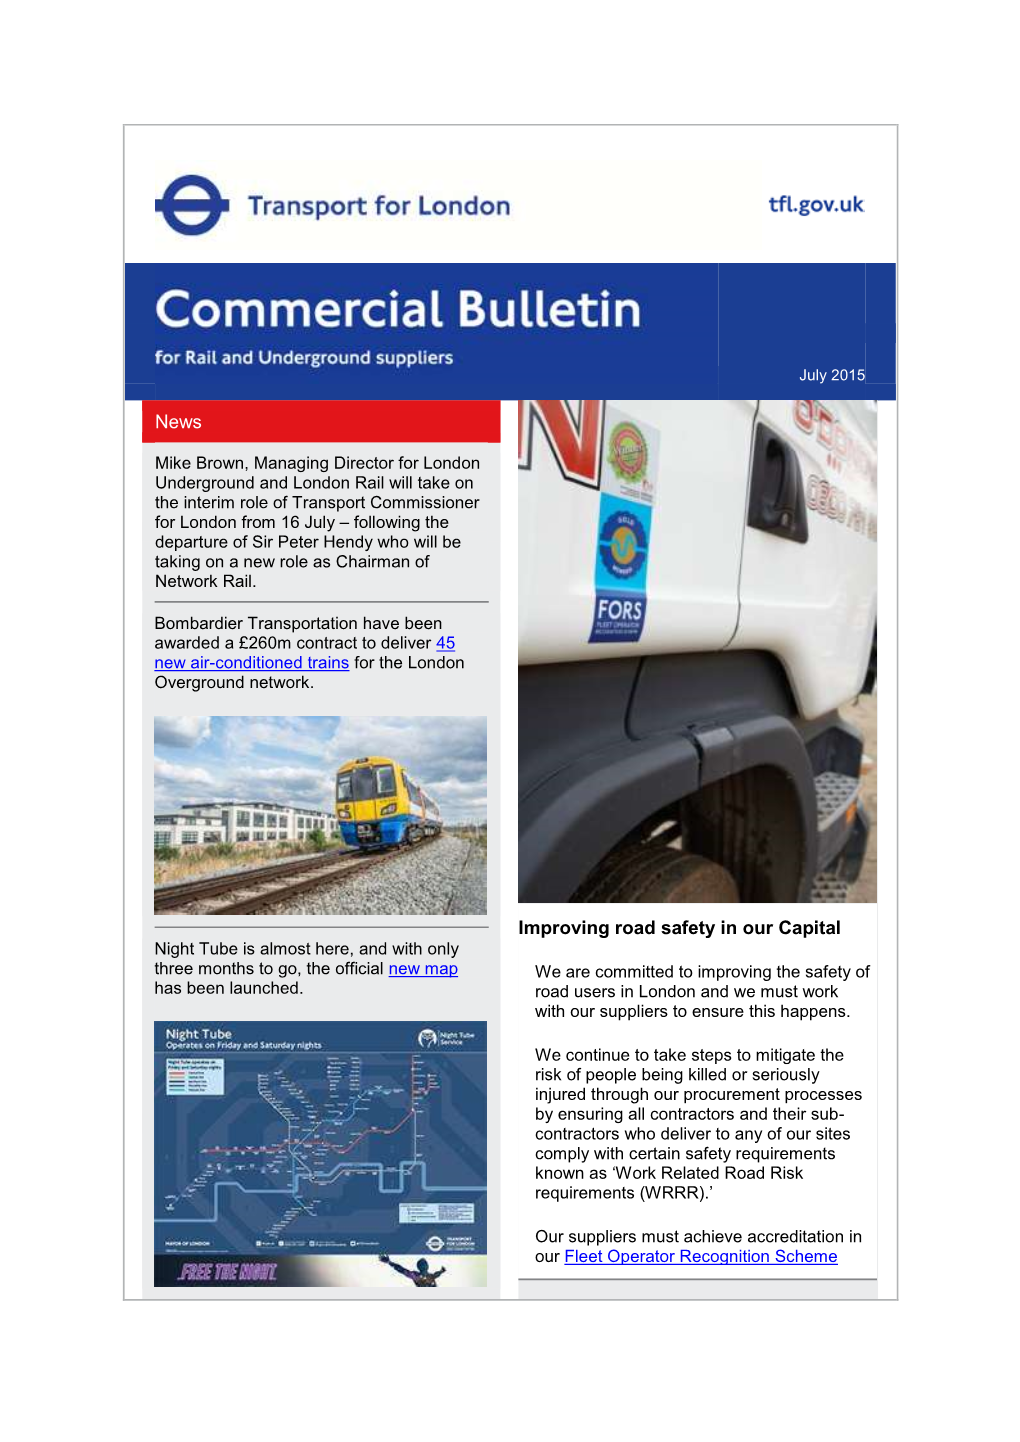 Commercial Bulletin for Rail and Underground Suppliers July 2015